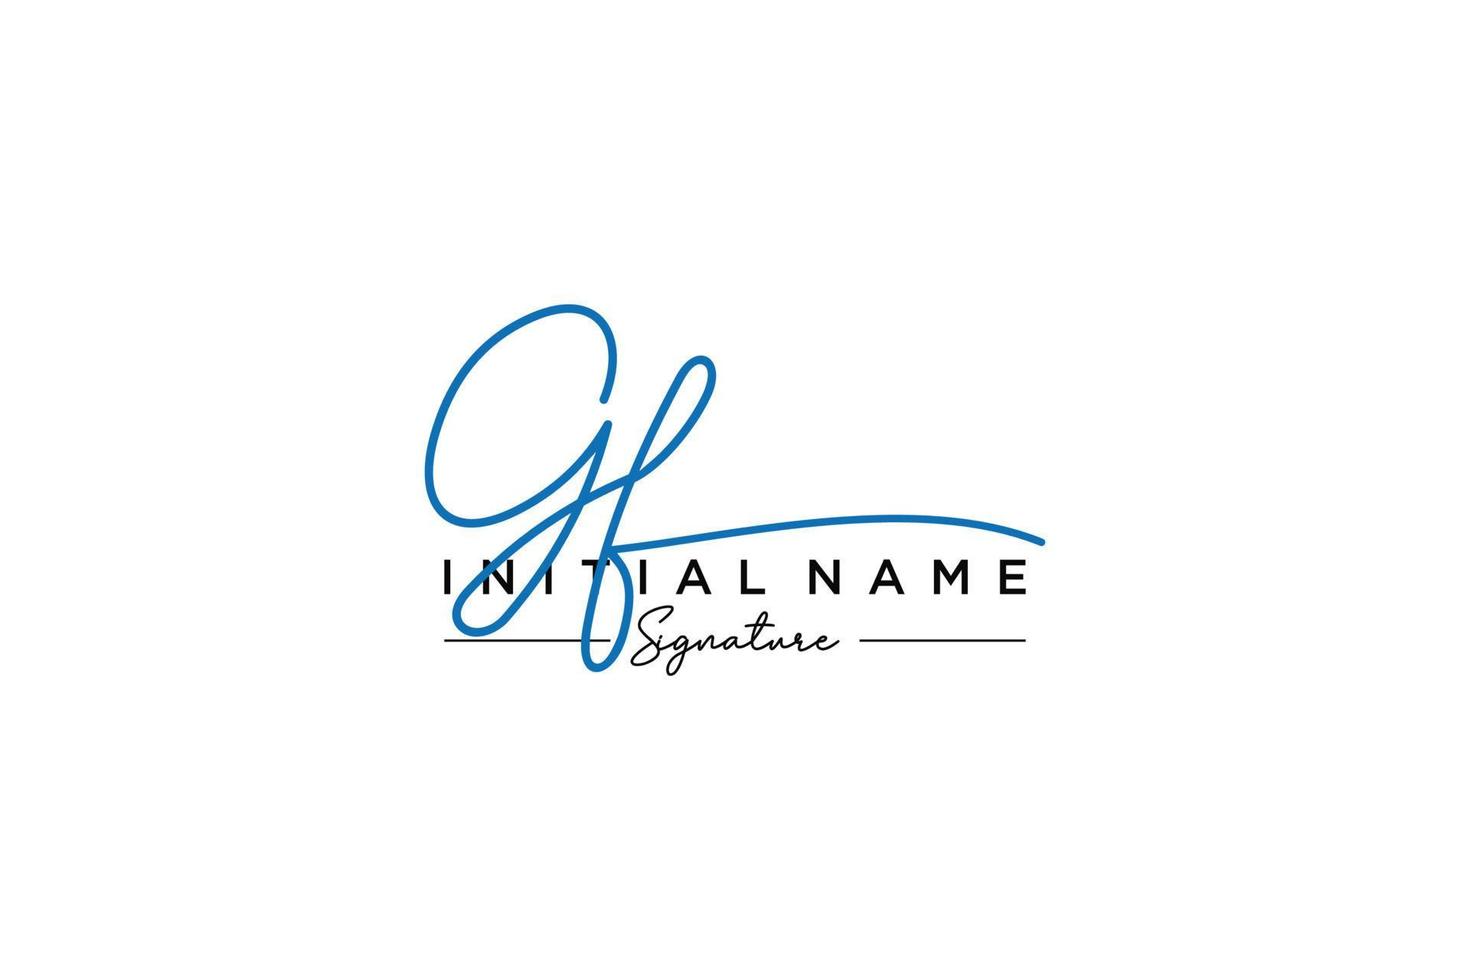 Initial GF signature logo template vector. Hand drawn Calligraphy lettering Vector illustration.